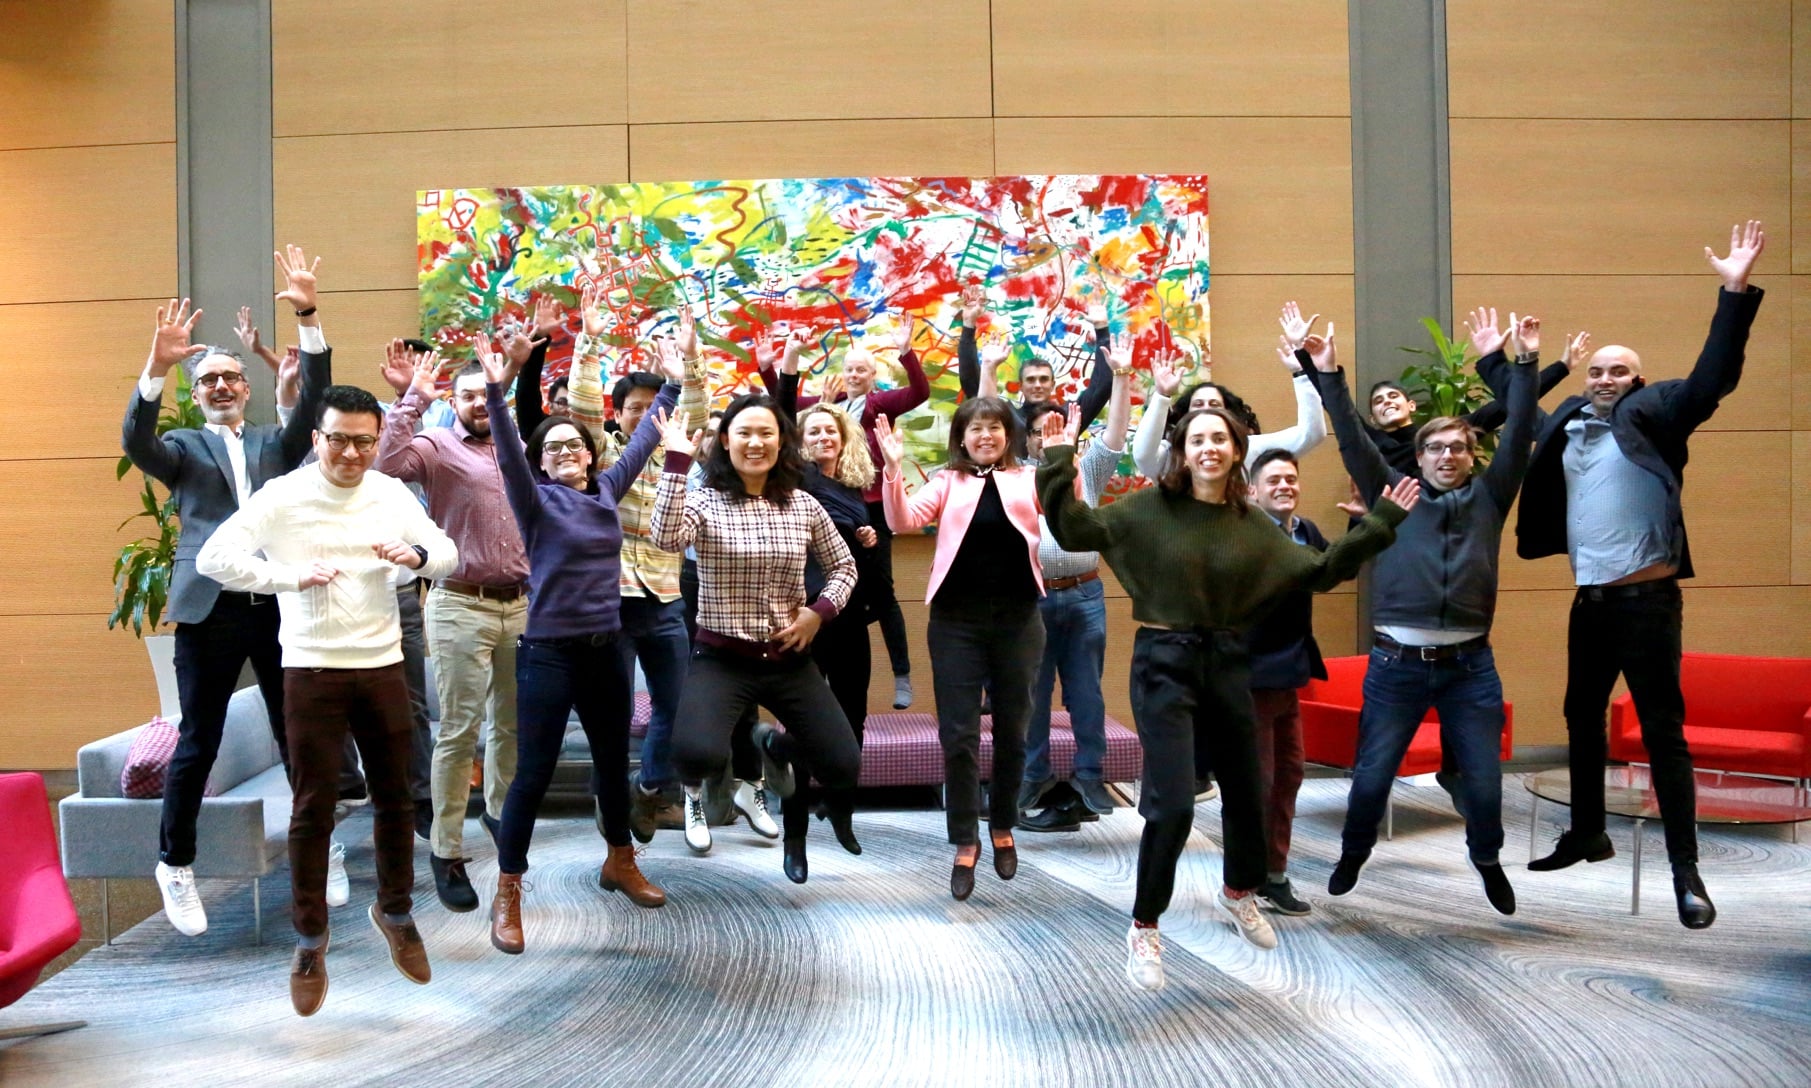 group of 10-15 people jumping and waving hands in the air in front of an abstract painting